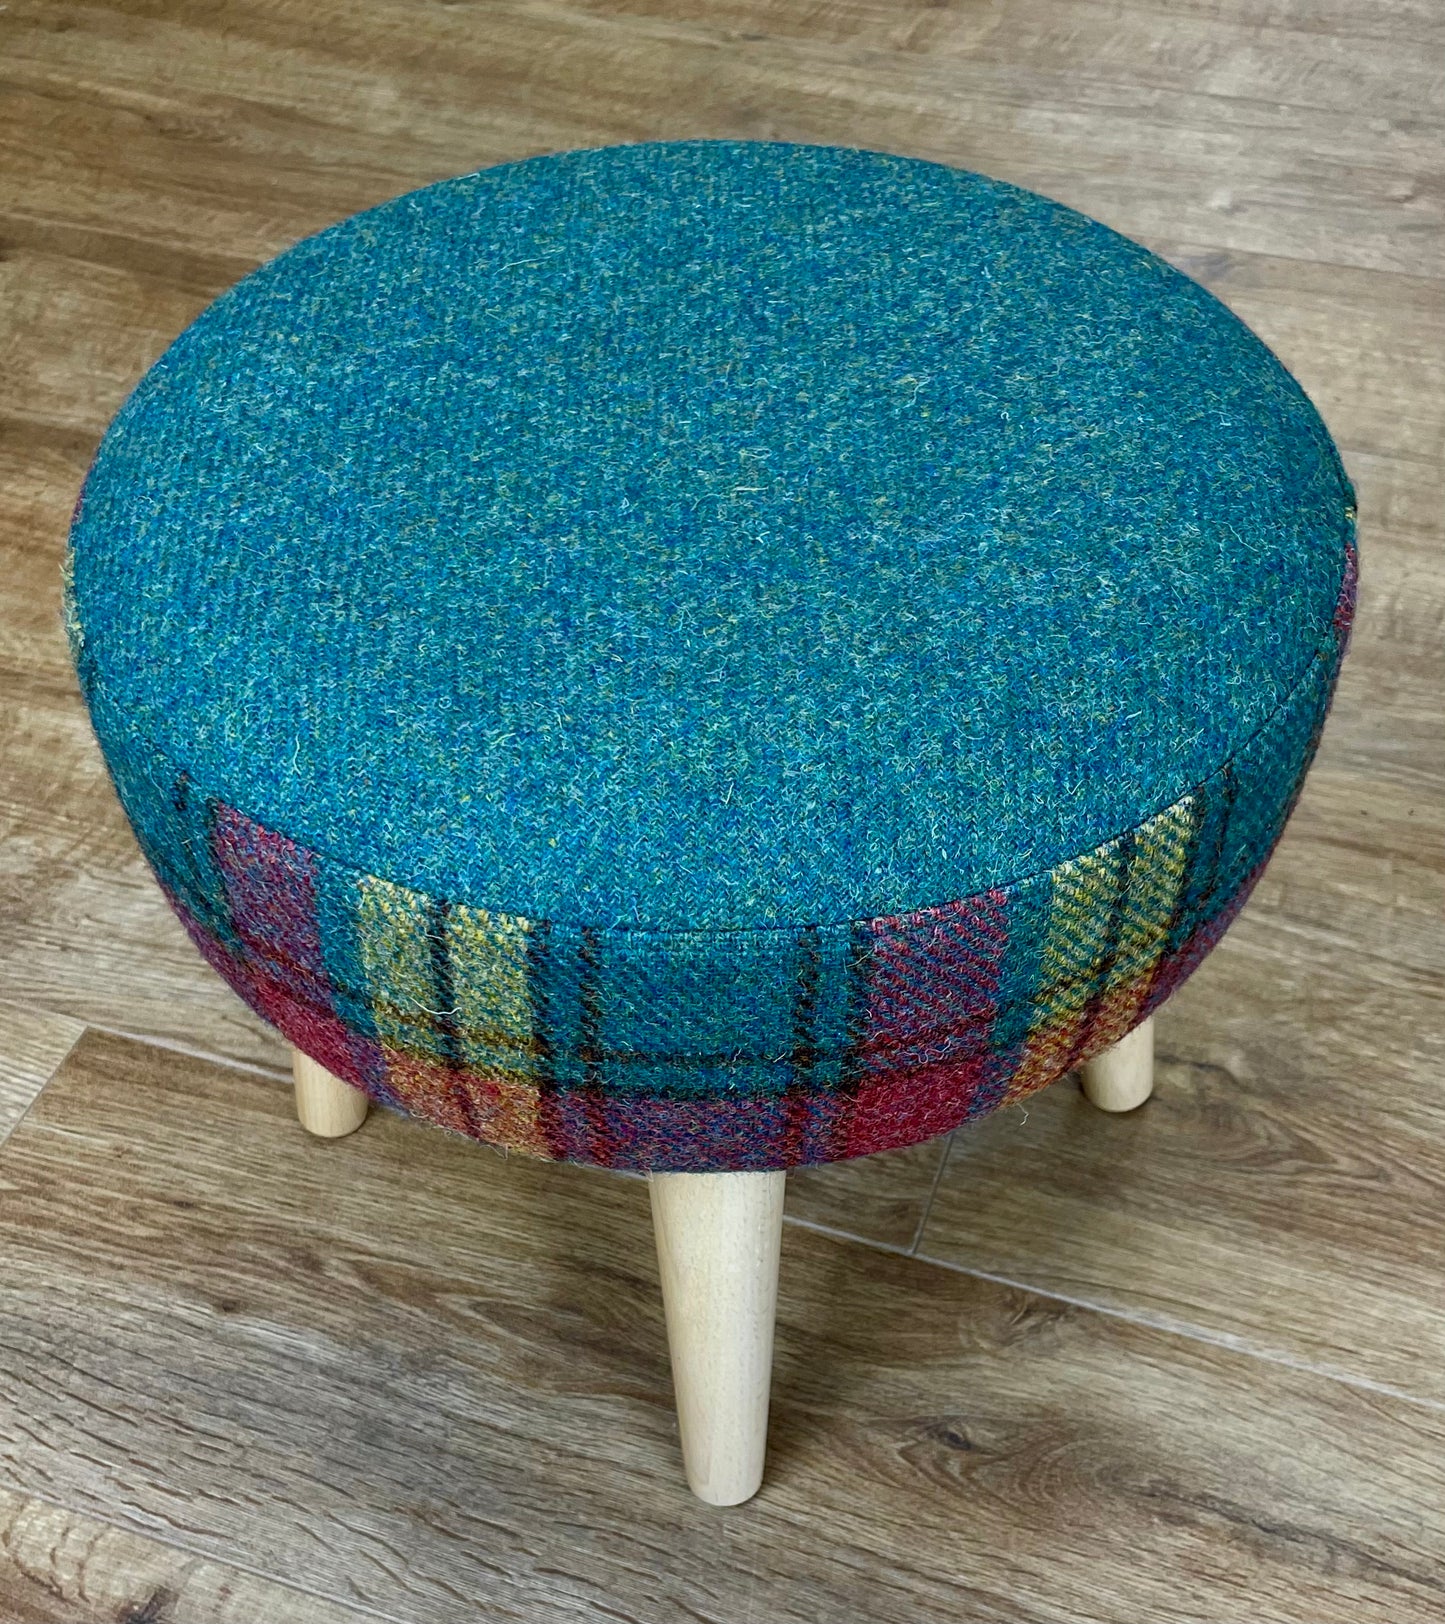 Harris Tweed Red, Green and Mustard Tartan Footstool with Varnished Wooden Legs